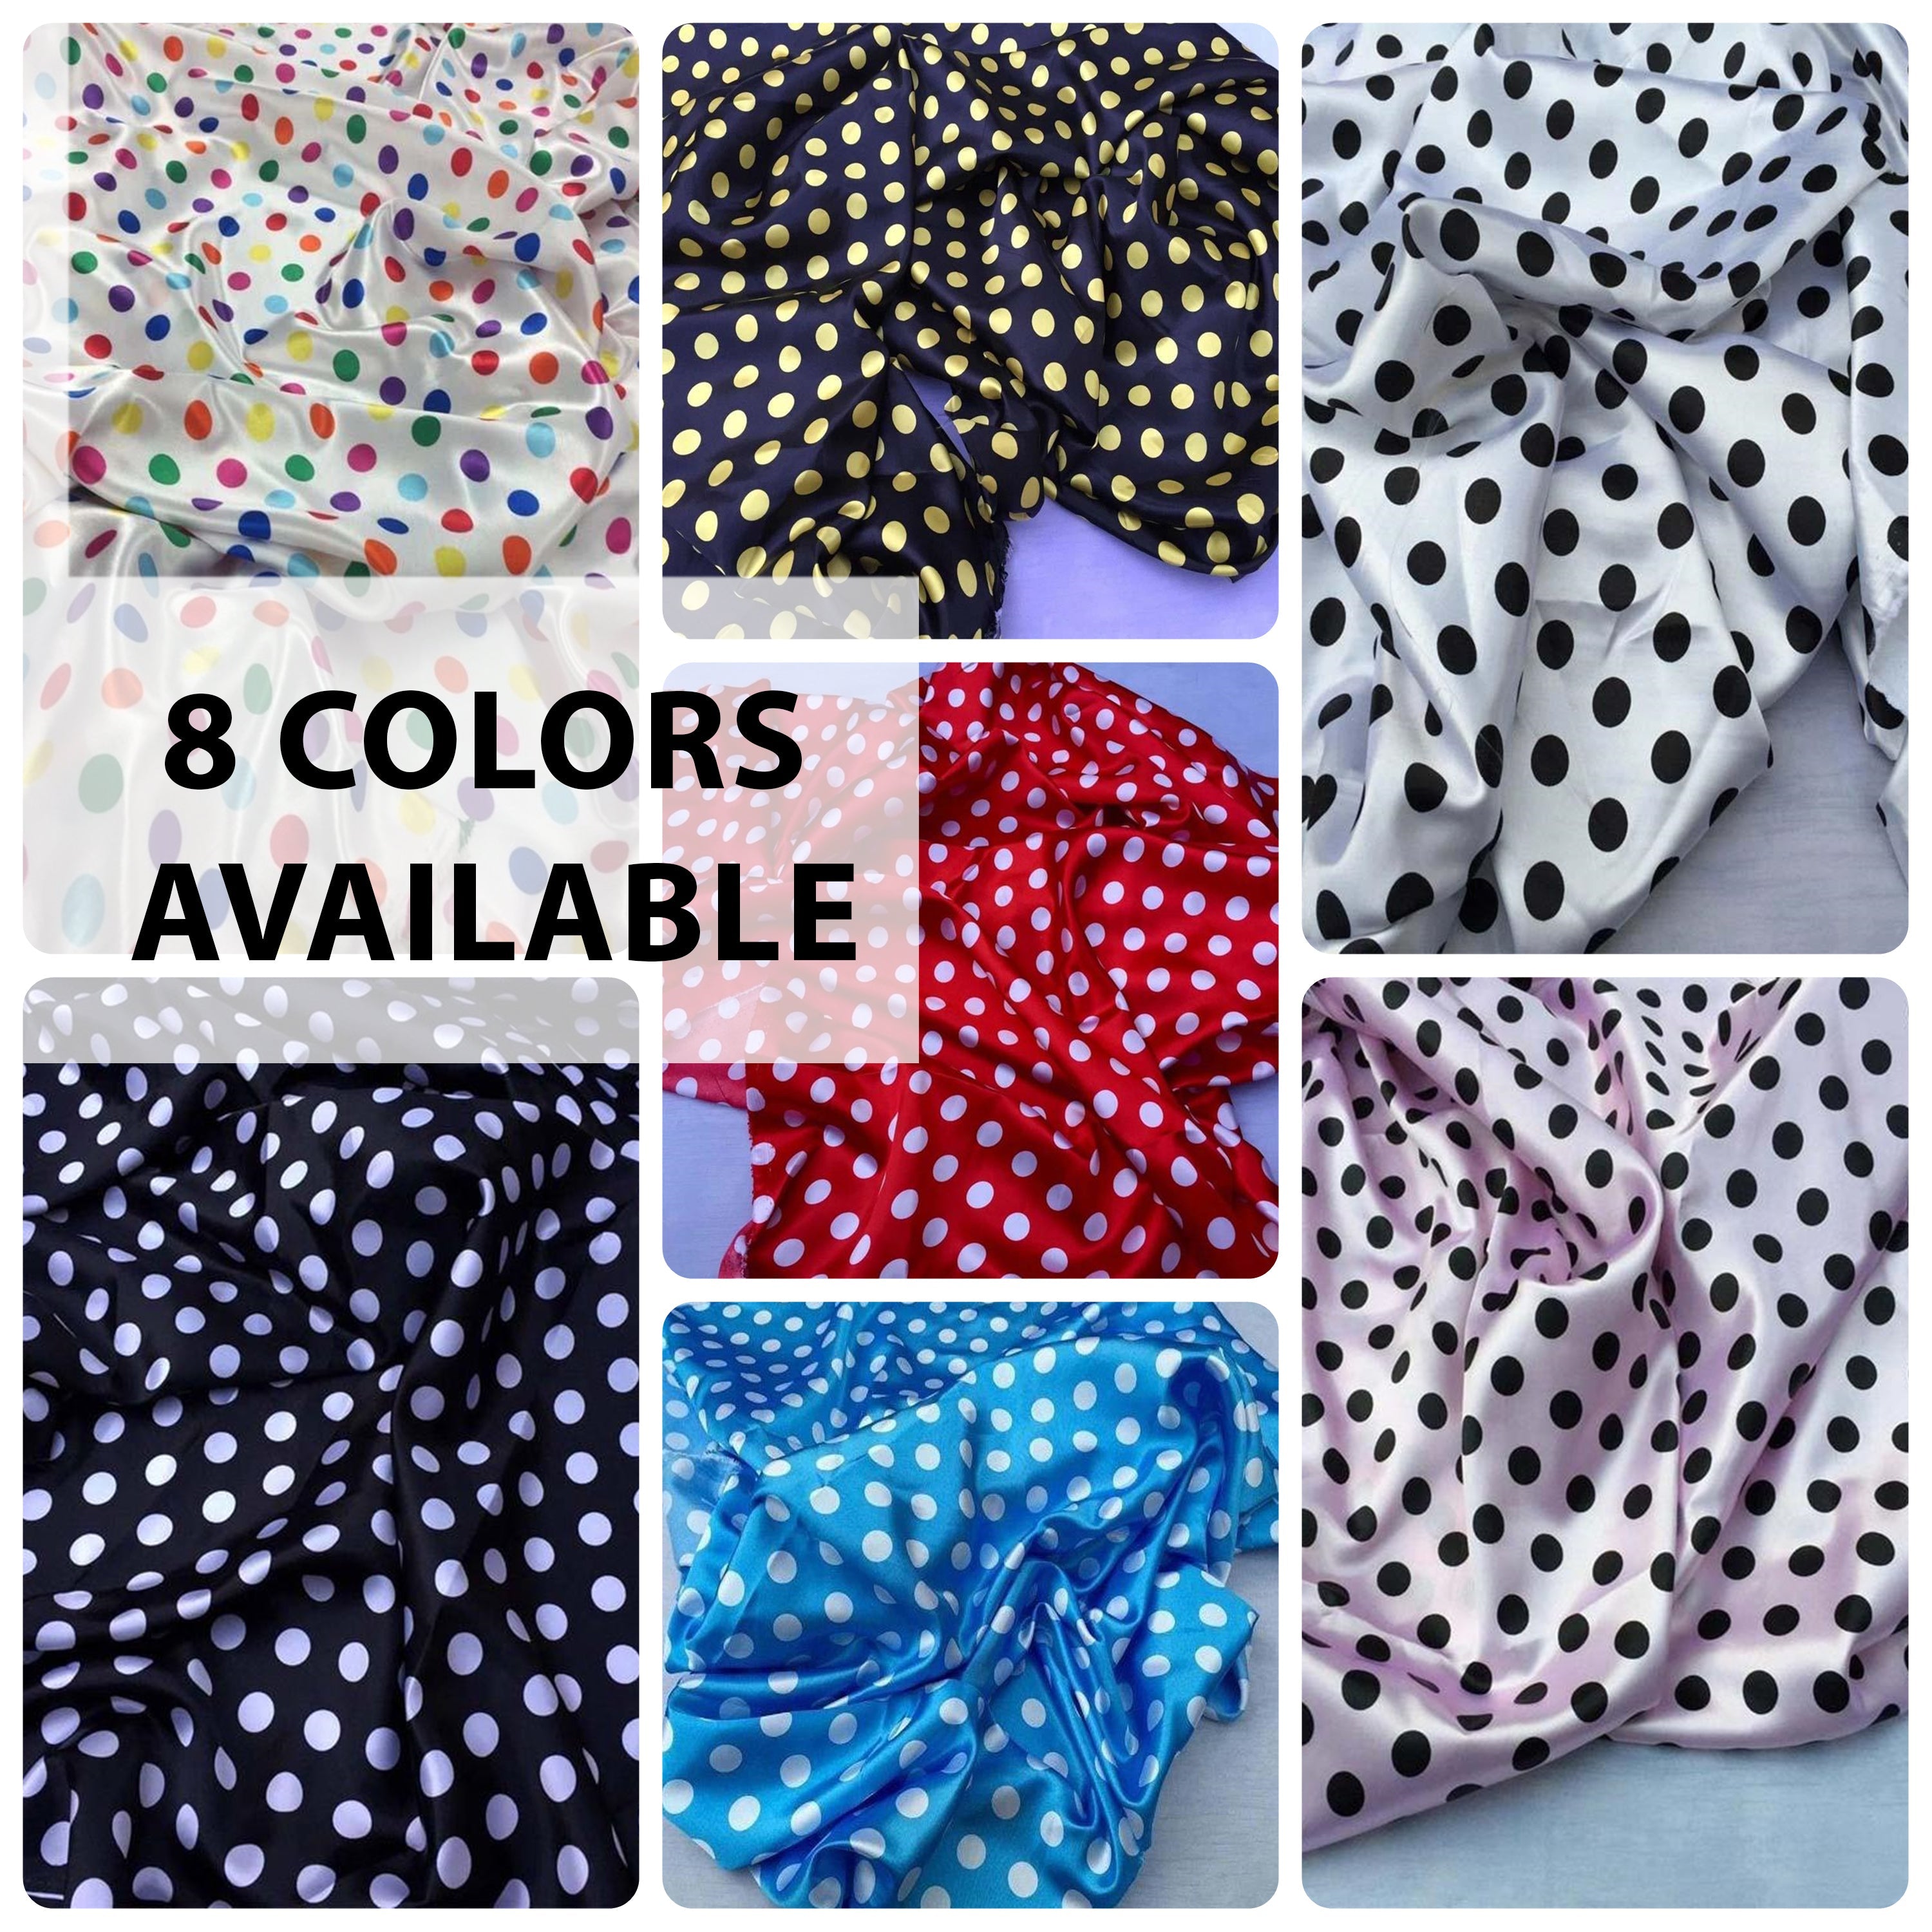 1/2 Inch Polka Dot Satin/ Fabric By The Roll / 20 Yards / Wholesale FabricSatin FabricICEFABRICICE FABRICSBlack/white60" Wide1/2 Inch Polka Dot Satin/ Fabric By The Roll / 20 Yards / Wholesale Fabric ICEFABRIC | Multi Color available